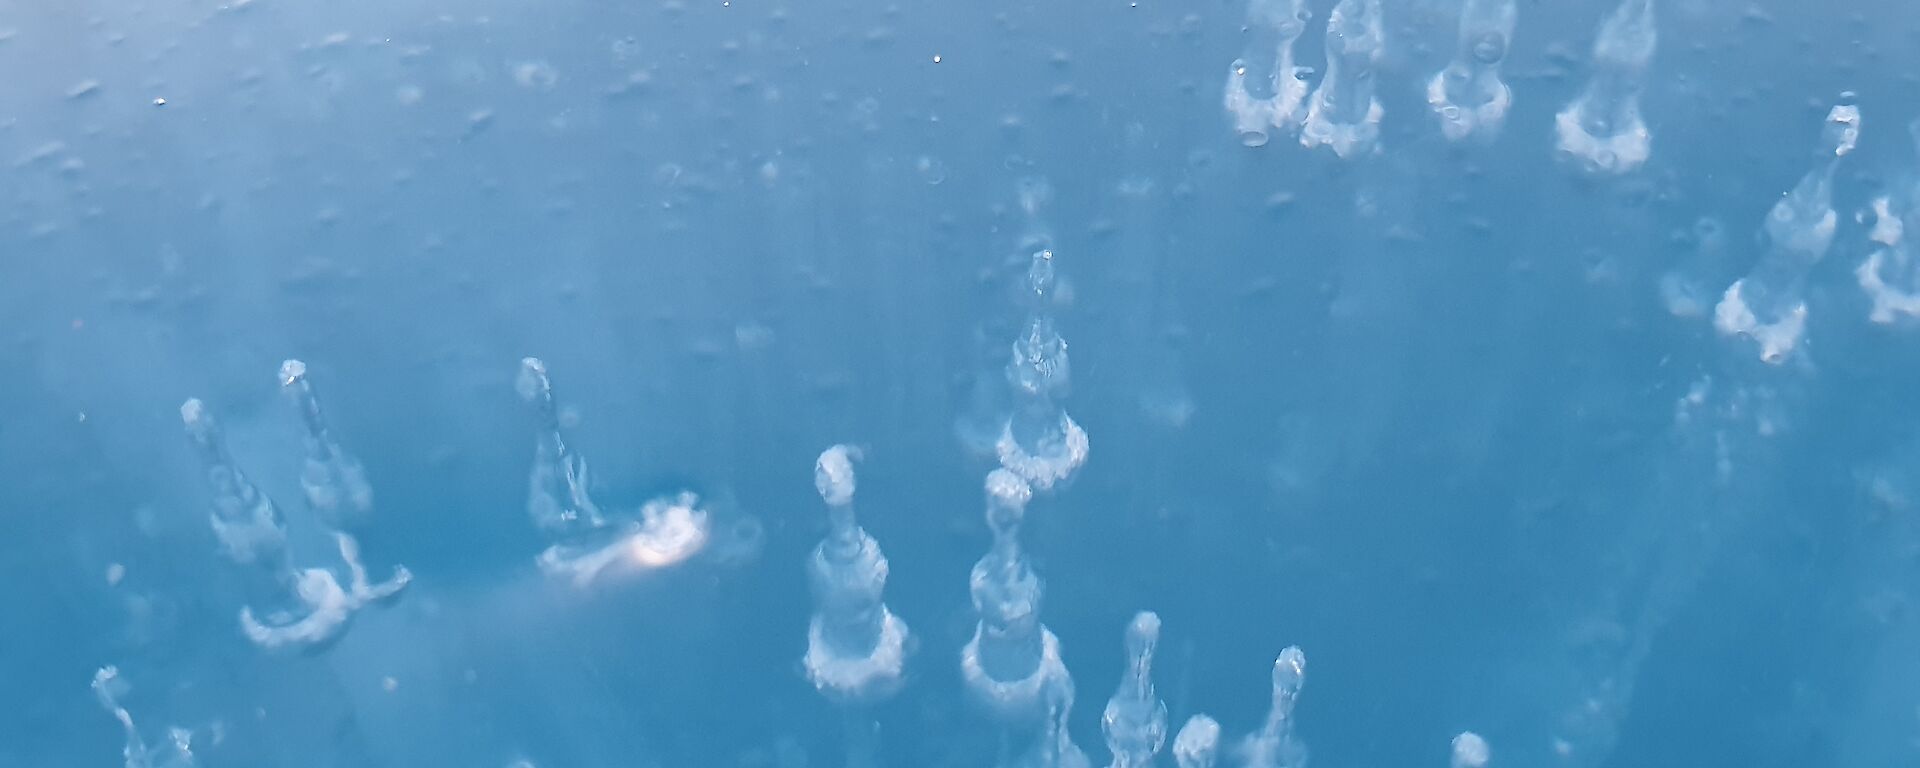 Clear blue lake ice with suspended air bubbles within creating a spectacular effect